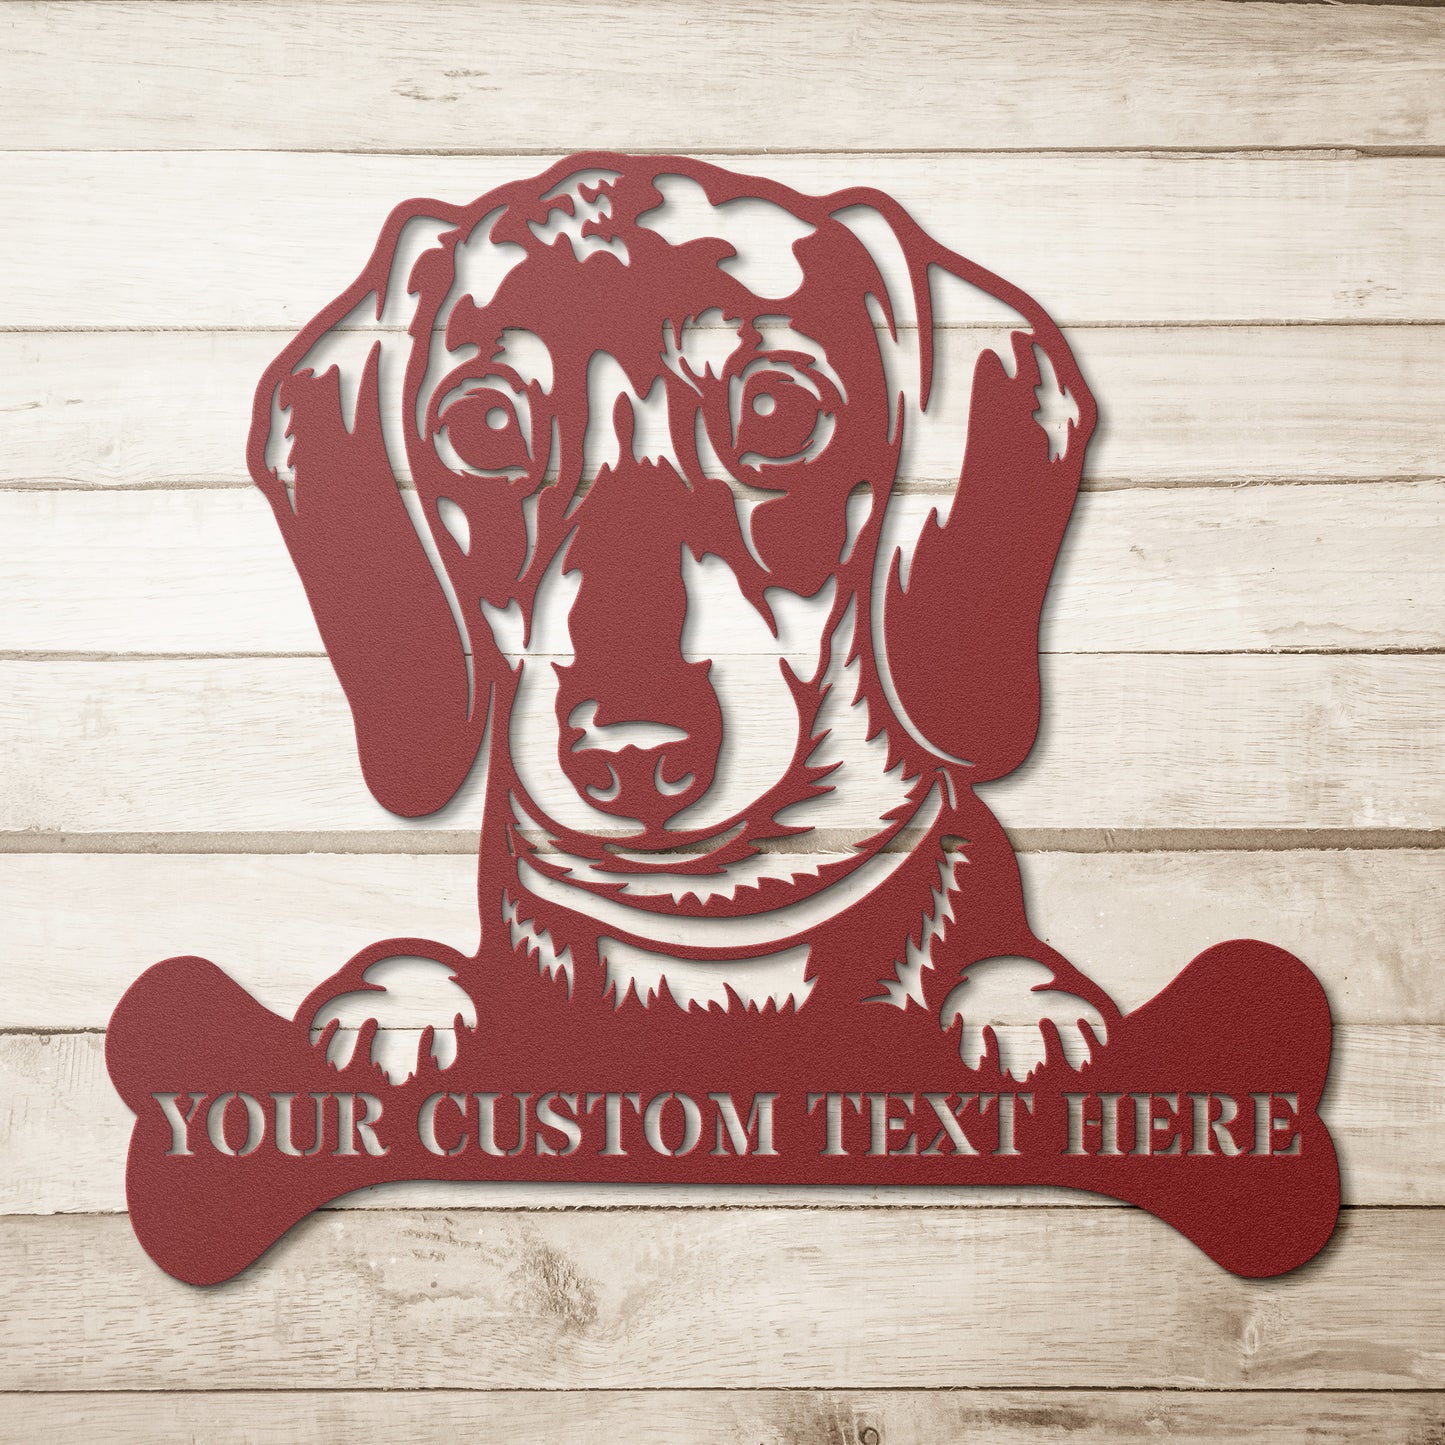 Personalized Dachshund Name Metal Sign. Customizable Dog Lover Wall Decor Gift. Dachshund Portrait Yard Sign. Personal Dog House Name Sign